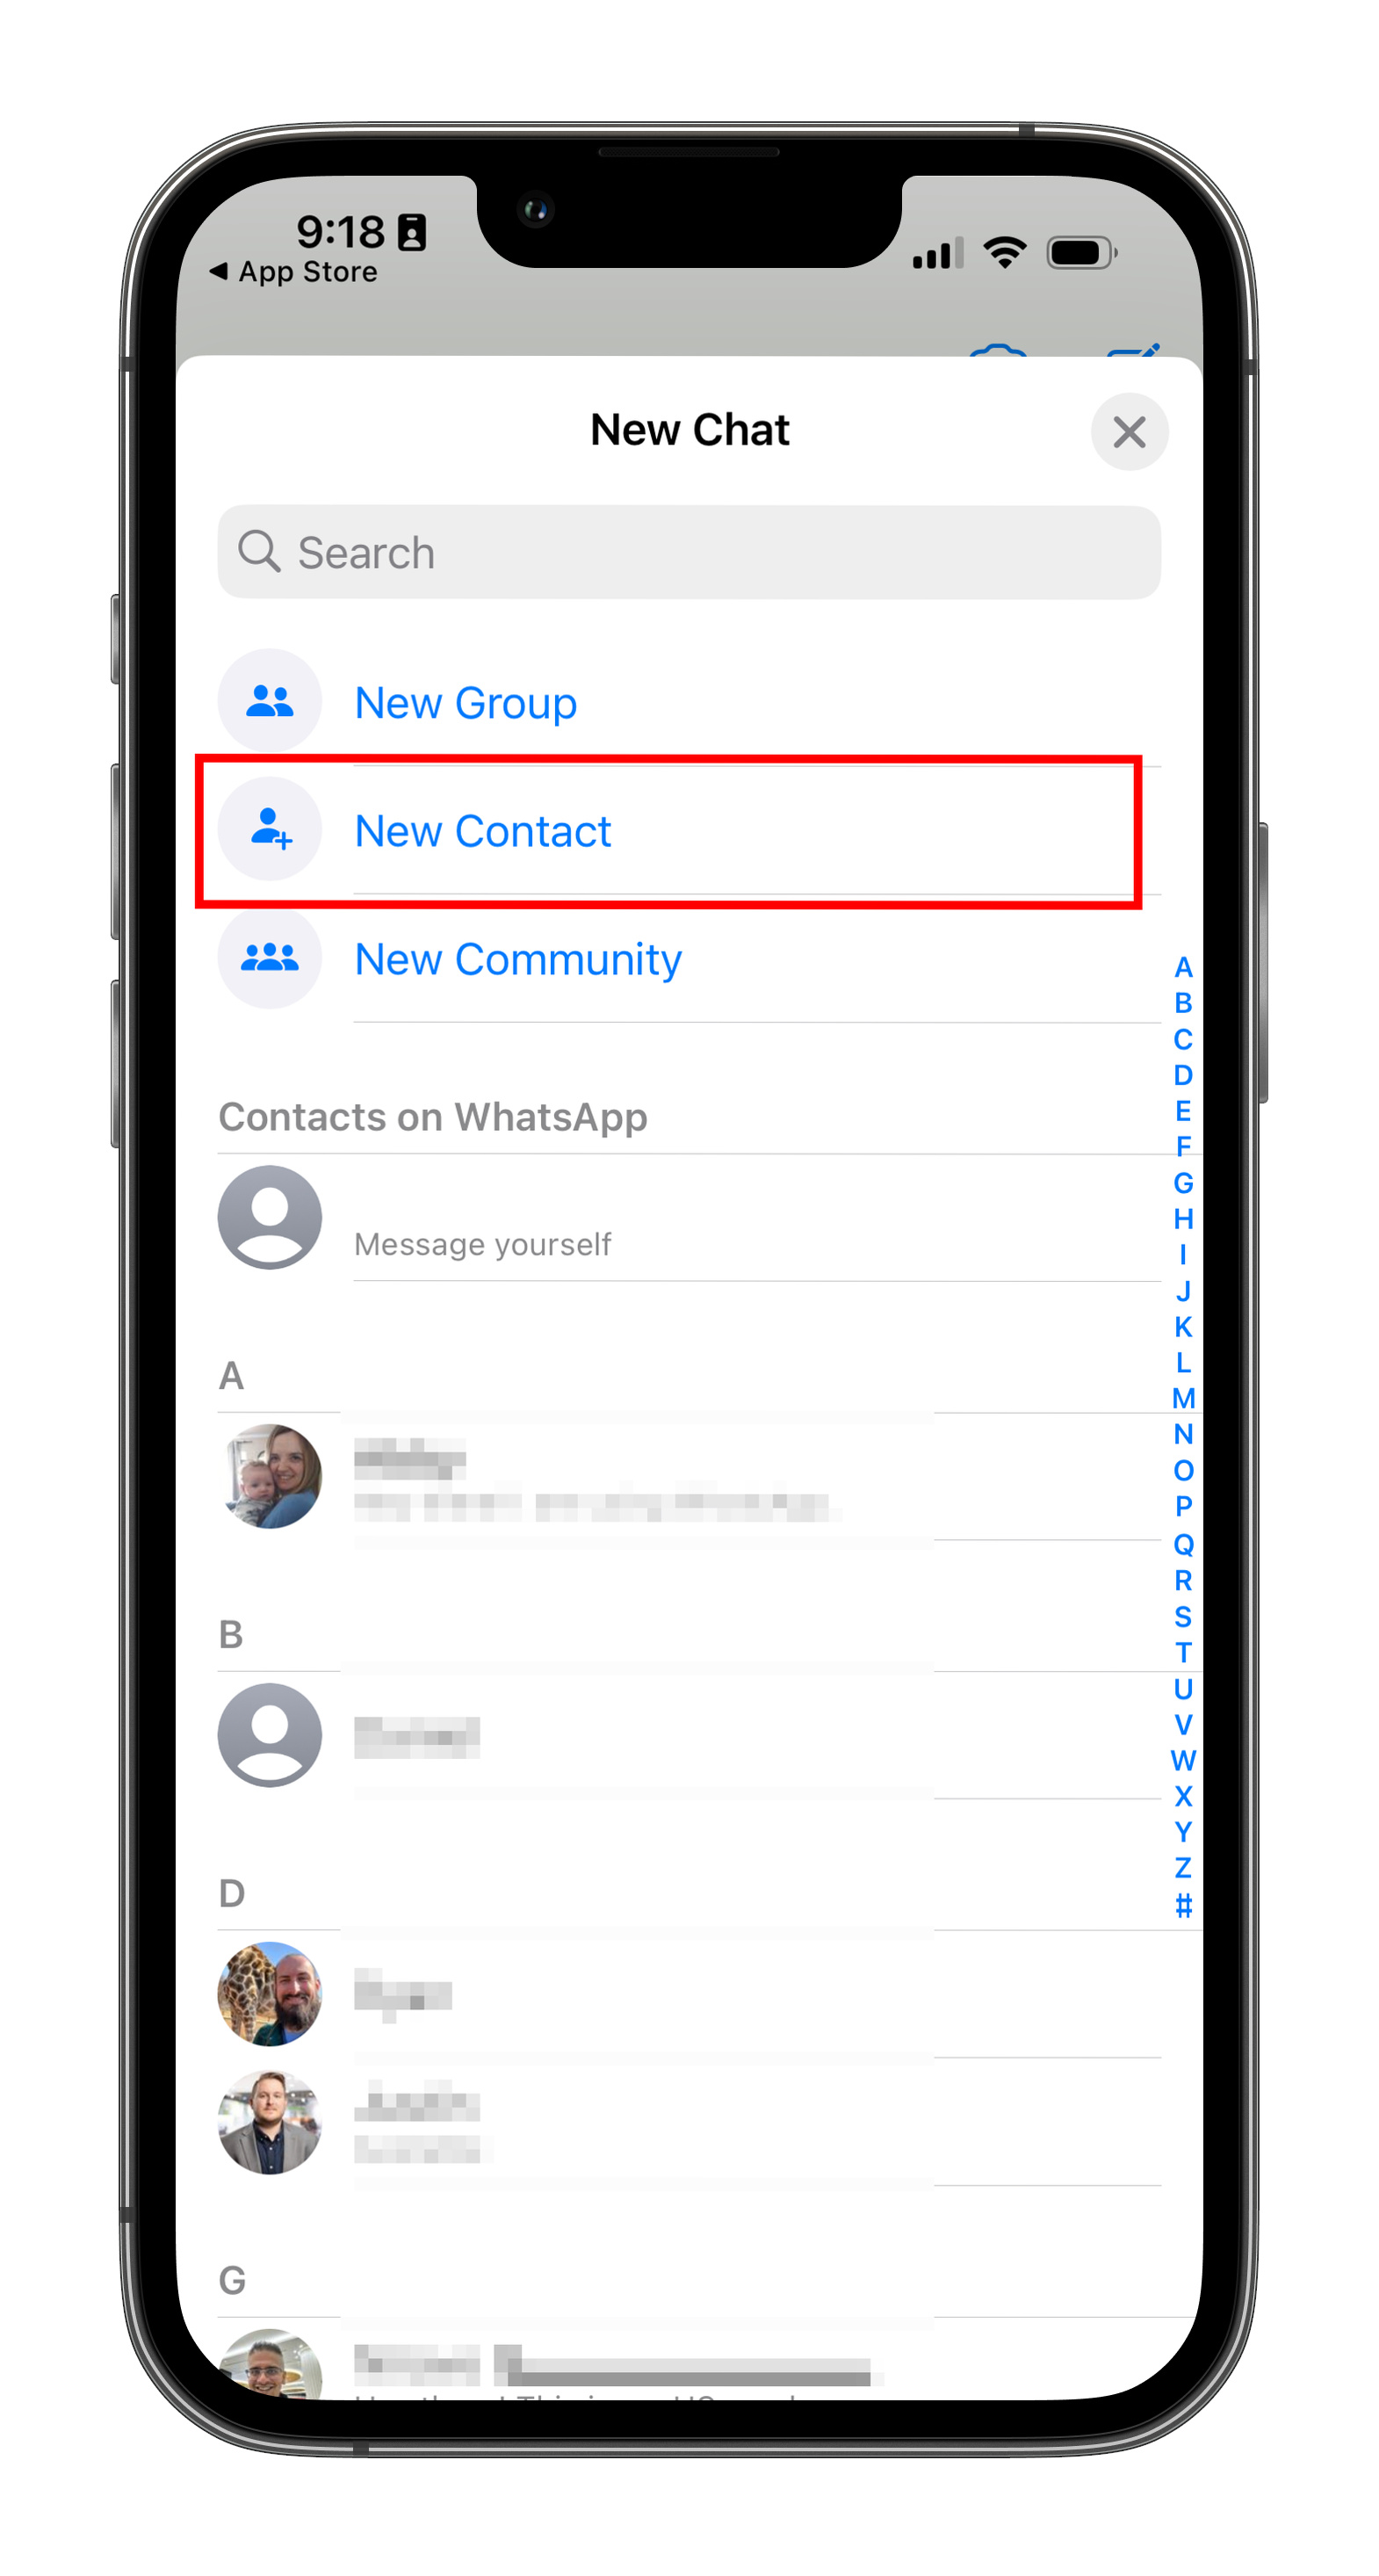 Adding a new contact in WhatsApp on iOS.